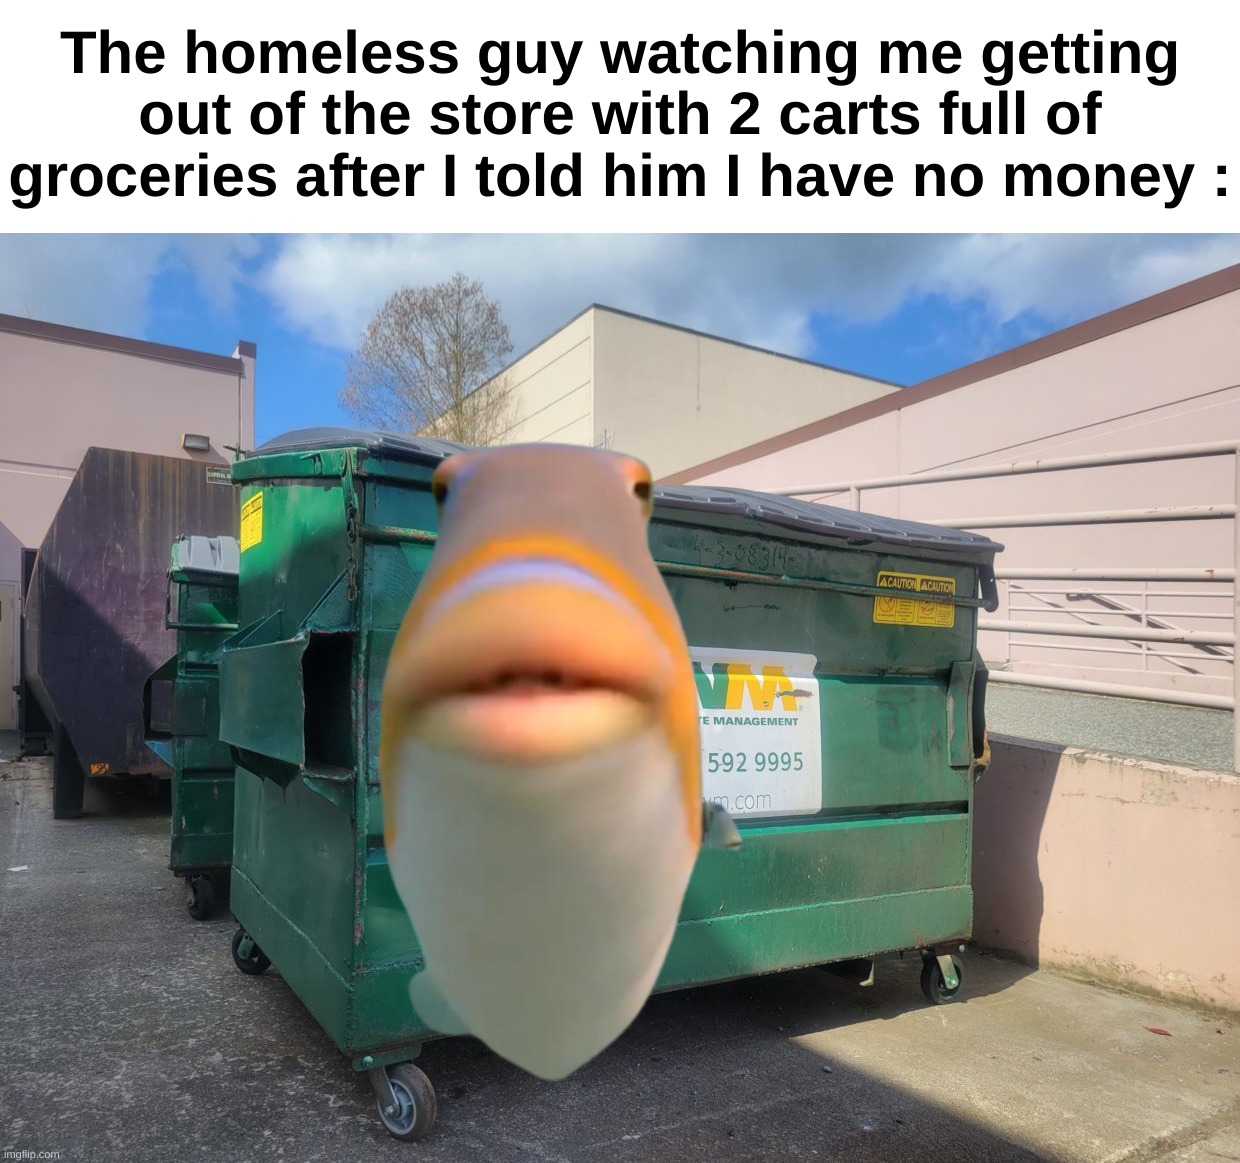 L bozo | The homeless guy watching me getting out of the store with 2 carts full of groceries after I told him I have no money : | image tagged in memes,funny,relatable,homeless,groceries,front page plz | made w/ Imgflip meme maker